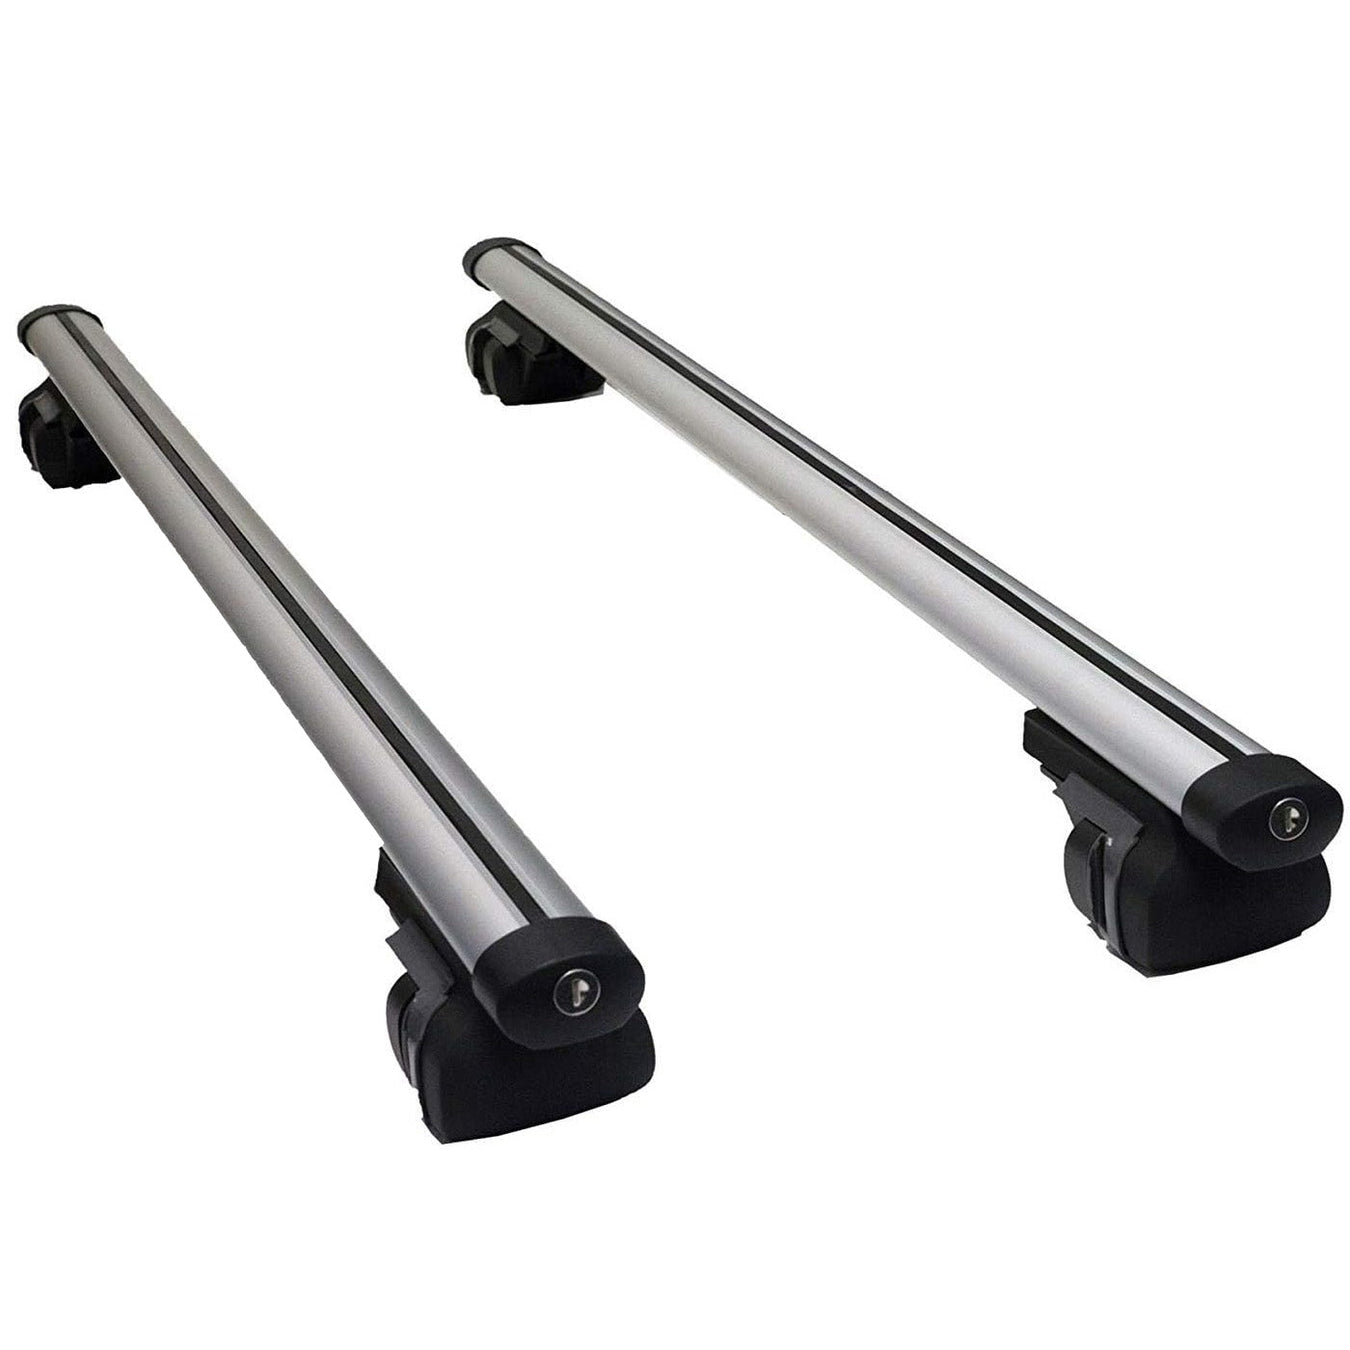 Roof bars for your vehicle